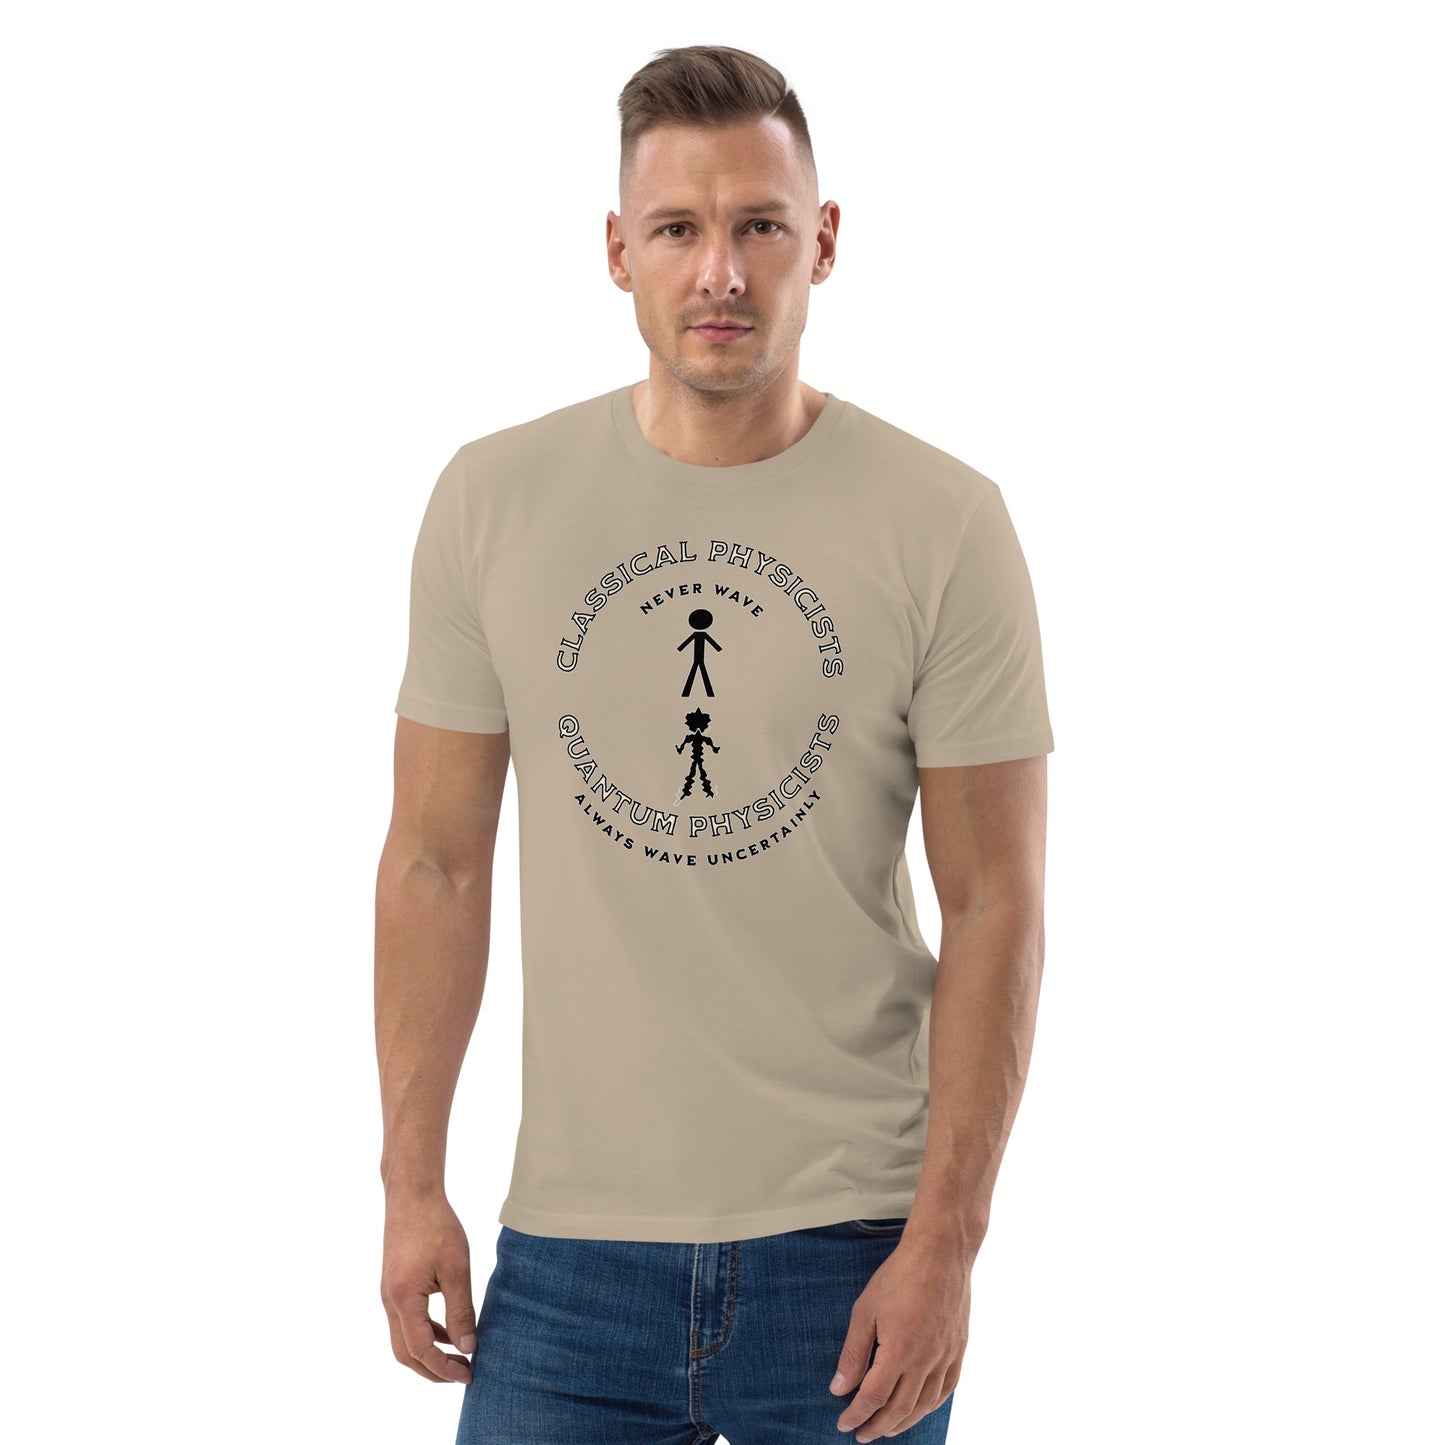 Unisex organic cotton t-shirt, Classical Physicists Never Wave...